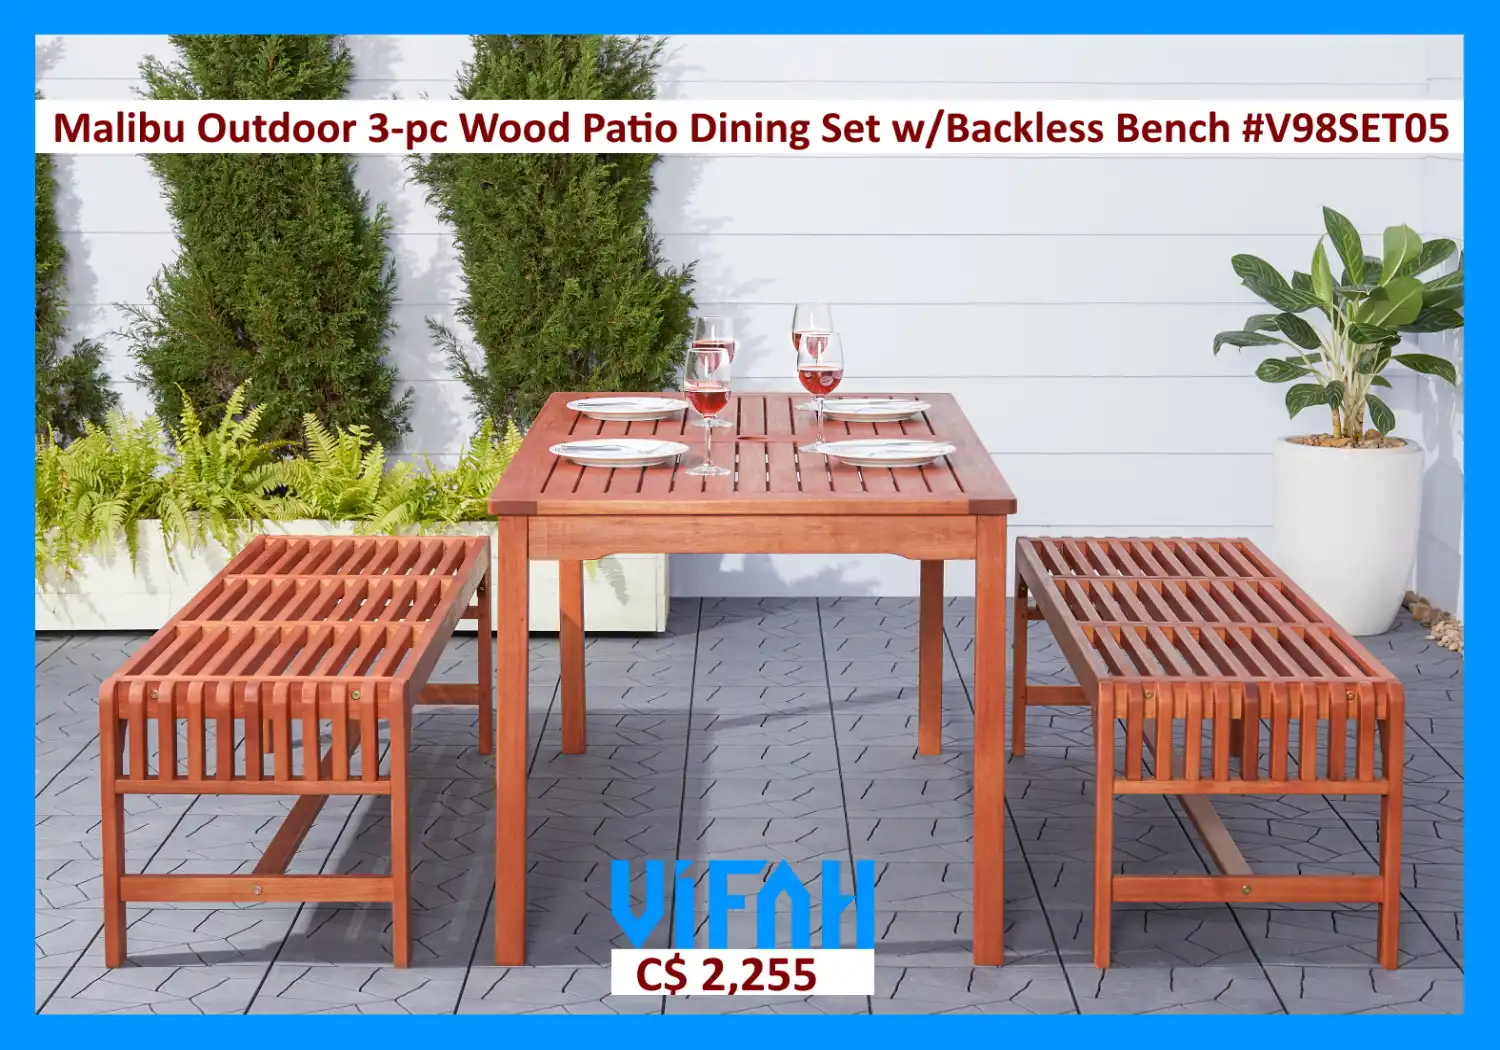 MALIBU Outdoor #V98SET05 3-piece Wood Patio Dining Set with Backless Bench